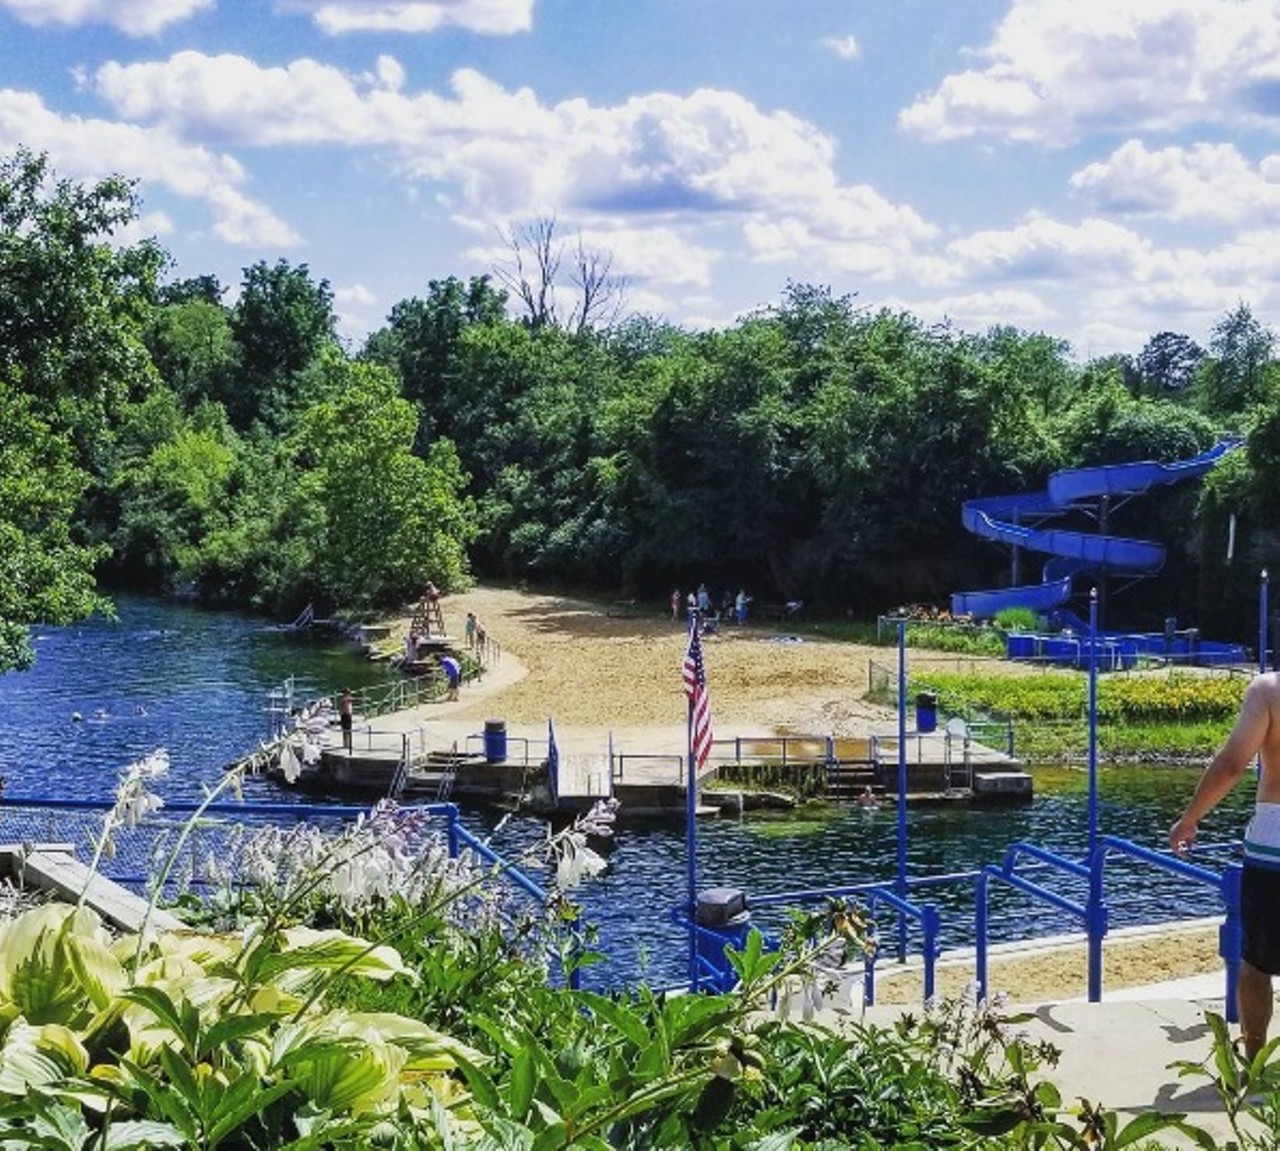 Centennial Quarry
5773 Centennial Rd, Sylvania, 419-885-7106
Offering plenty of room to water slide as well as hike, this is a place perfect for hanging out with a crowd, or maybe just your dog. 
Photo via improvislaw/Instagram